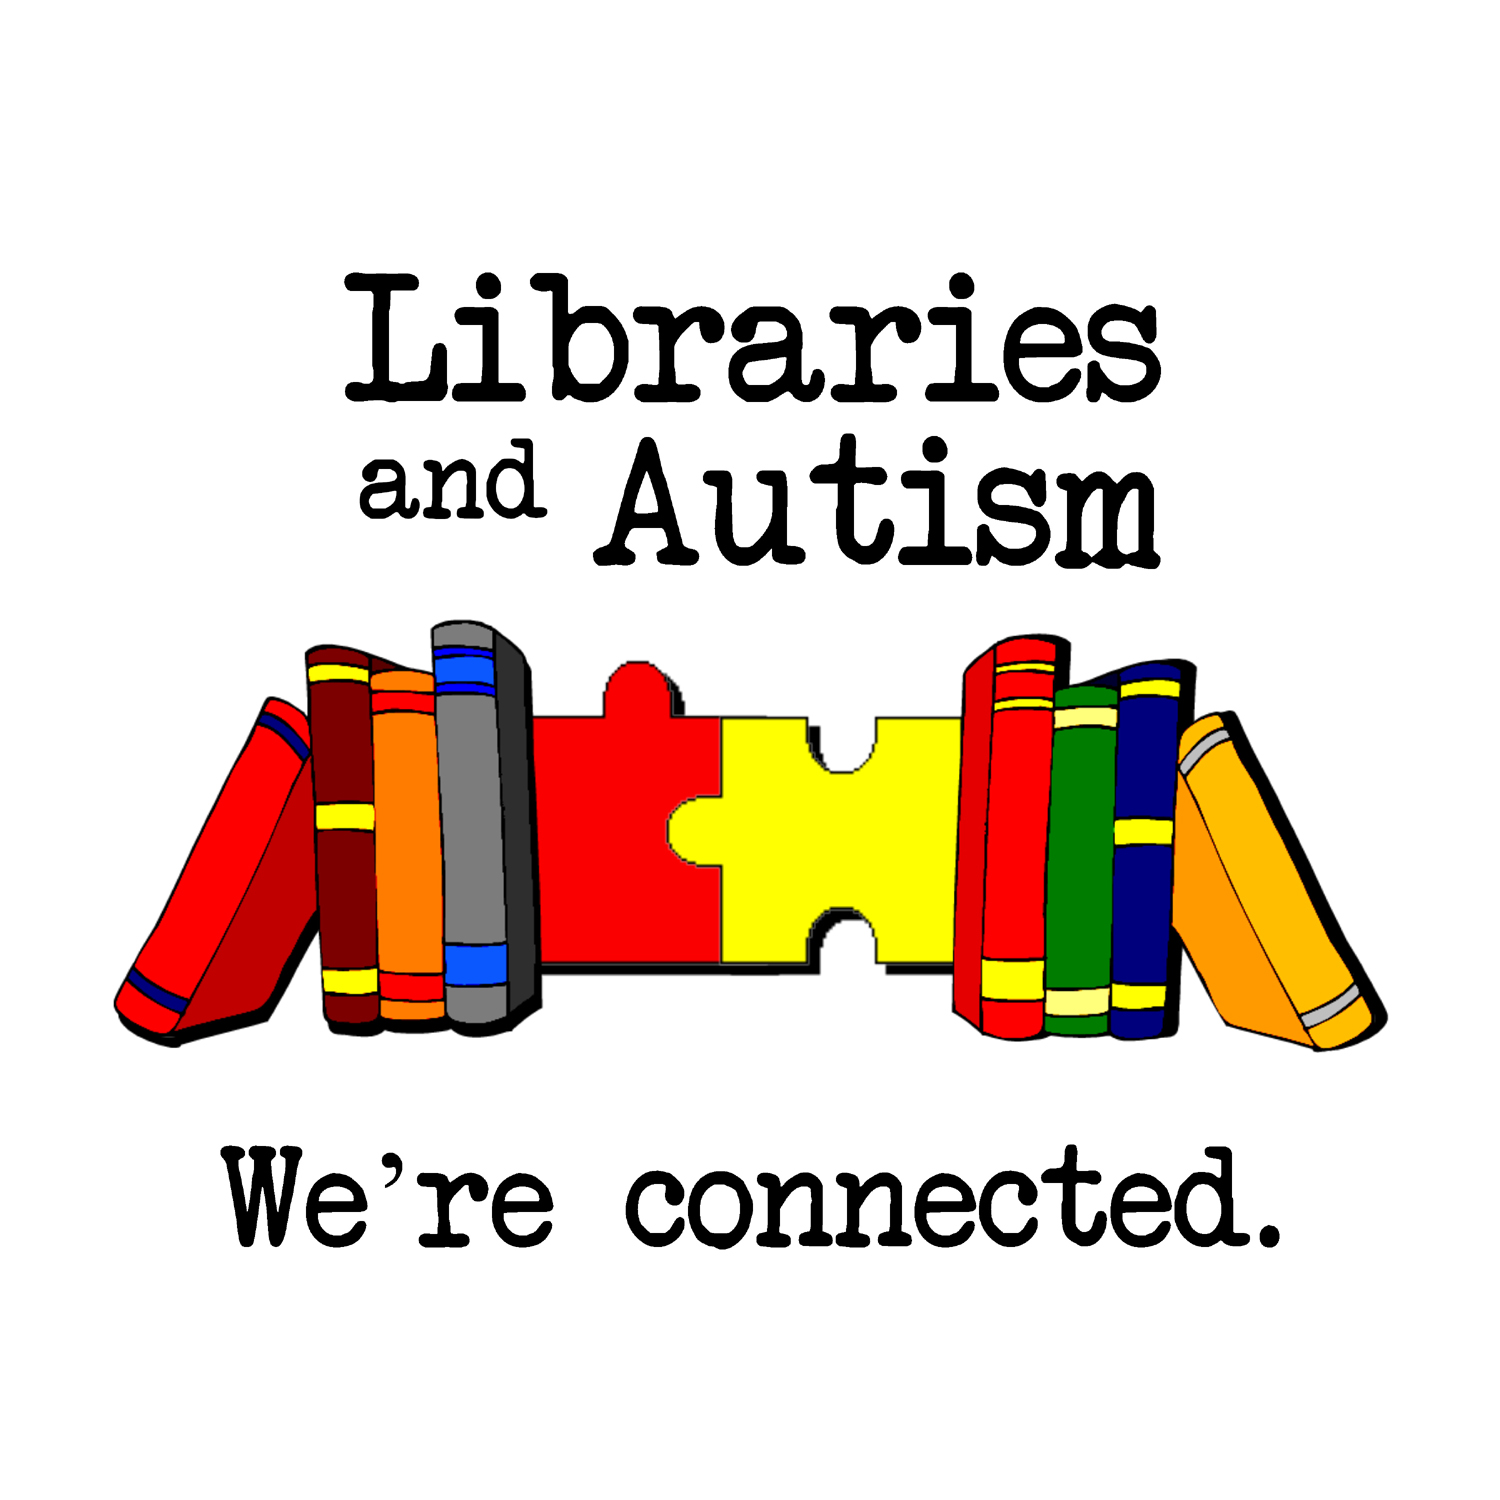 Libraries and Autism: We're Connected